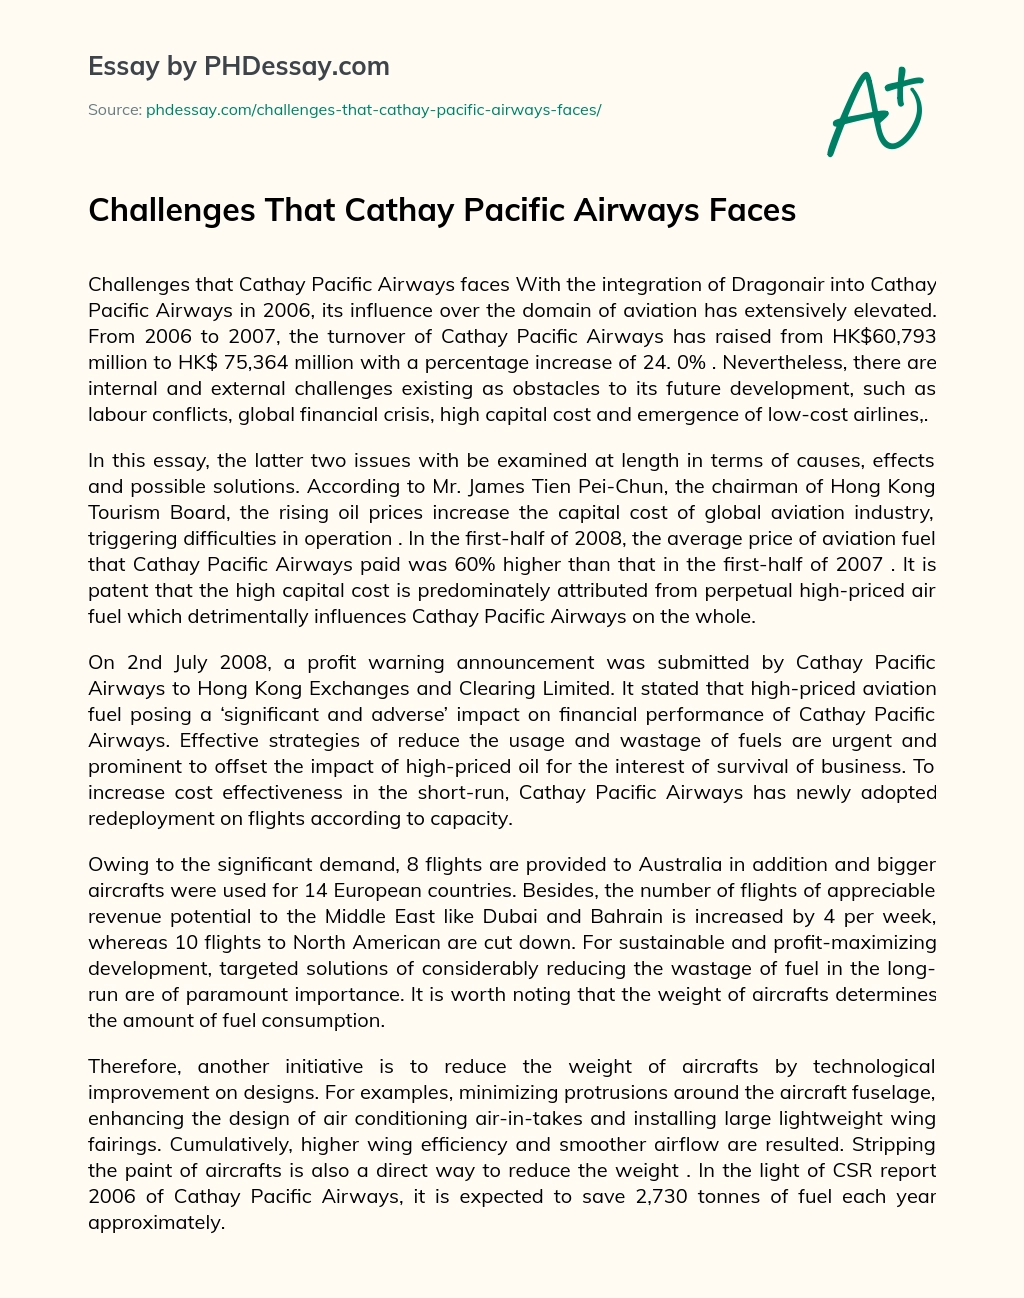 Challenges that Cathay Pacific Airways faces essay